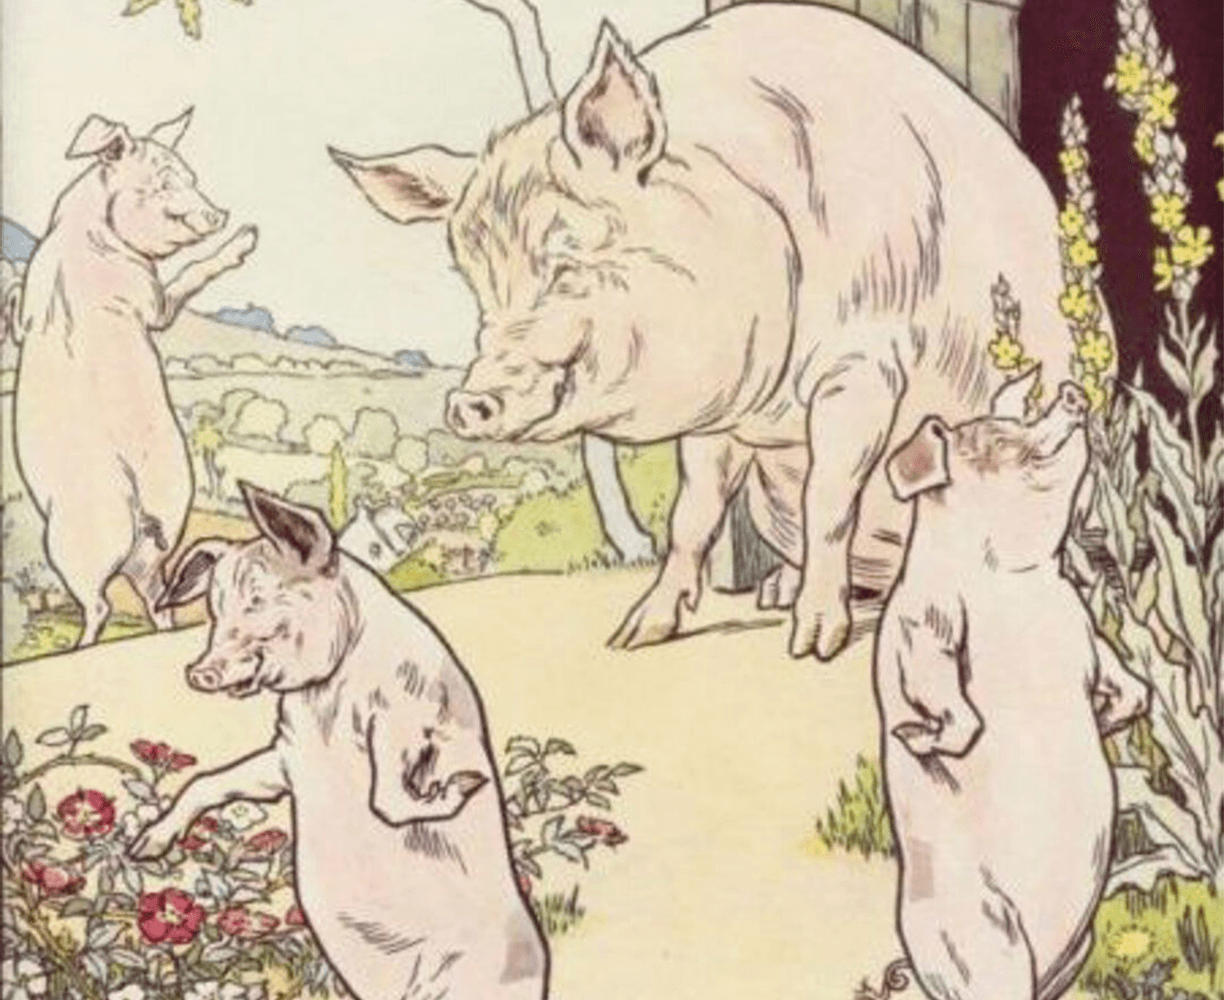 The cover art for the episode The Three Little Pigs #2 from the comics series Treasury of Tales, which is number 47 in the series